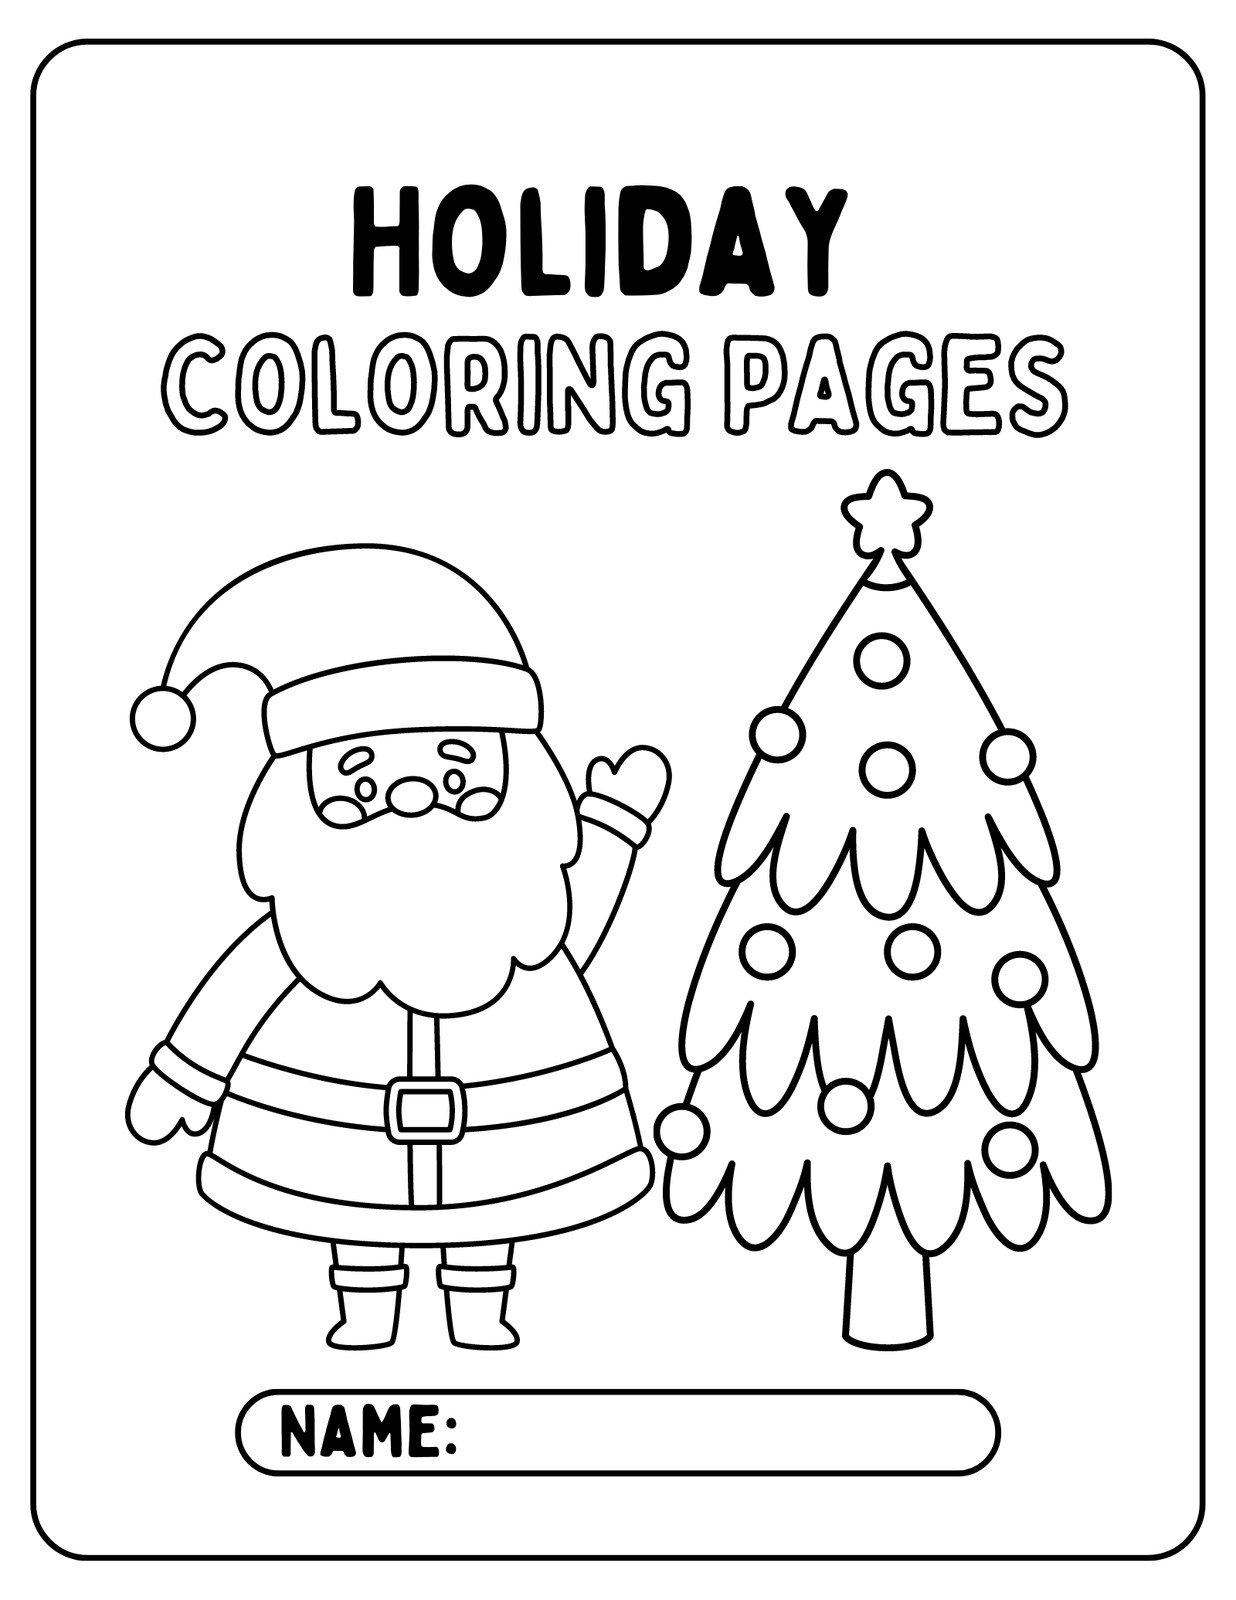 Name Coloring Page, Personal Mindfulness